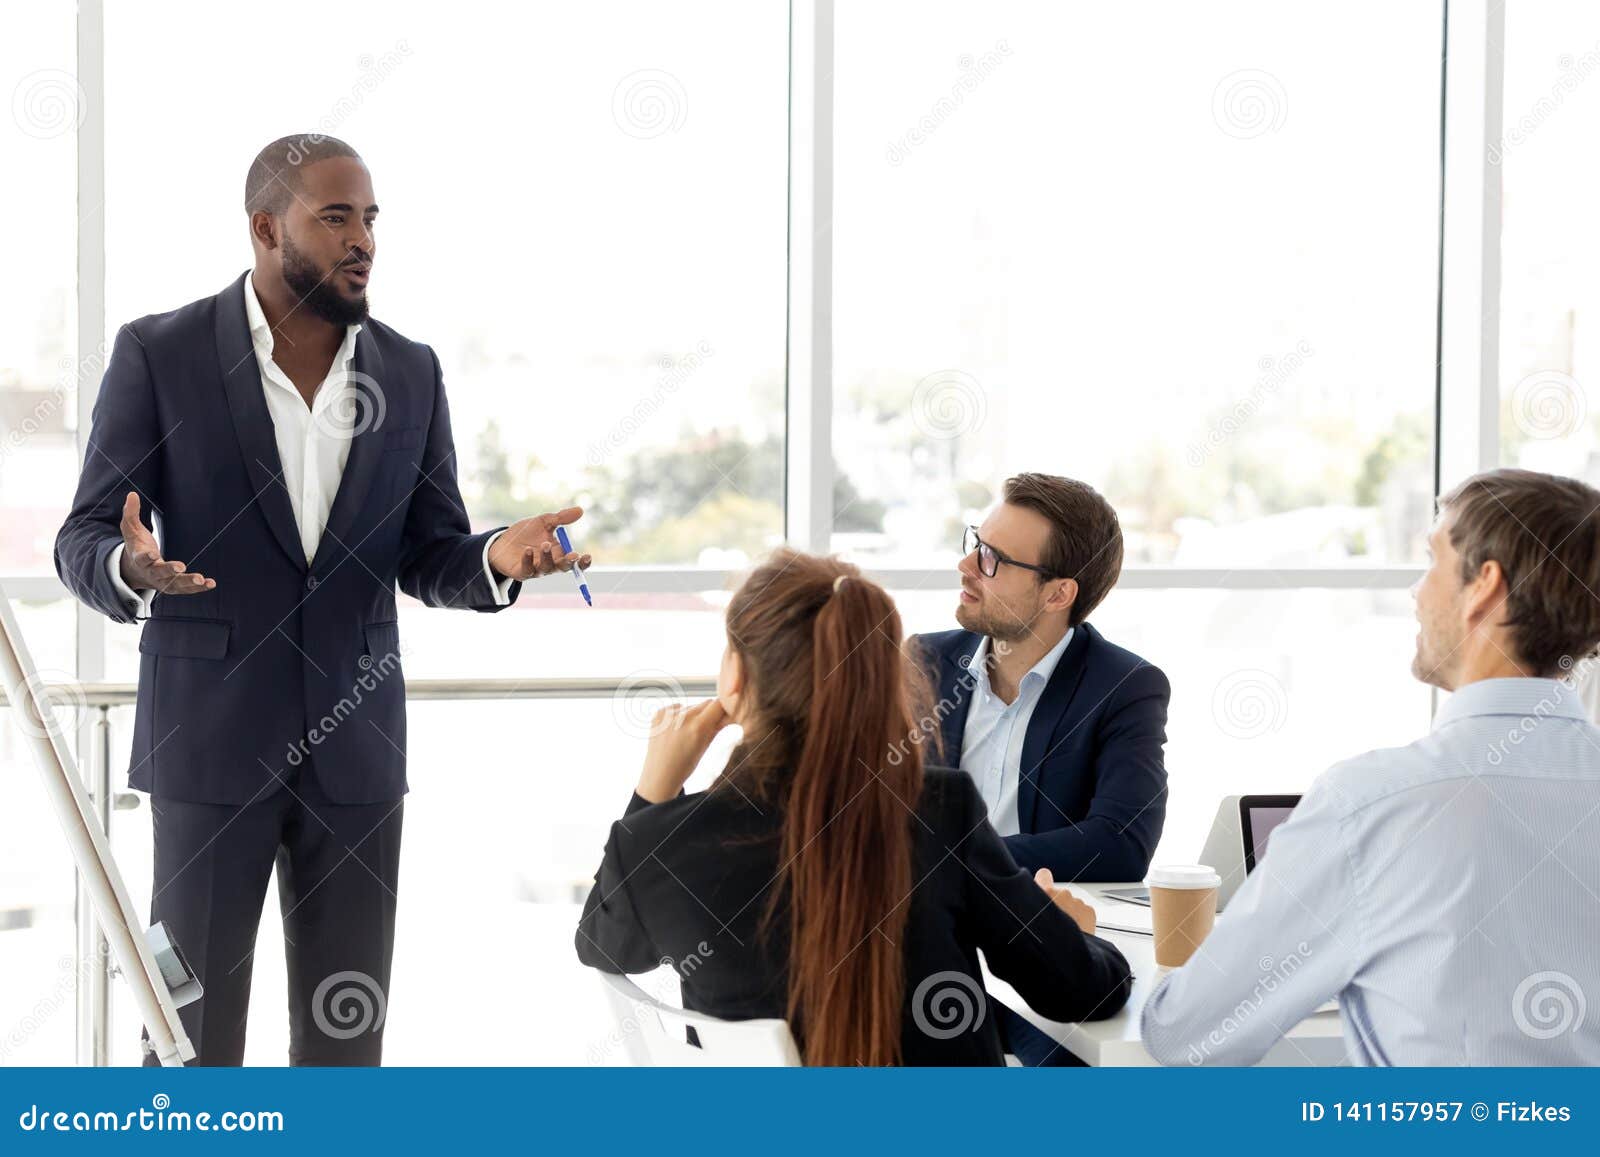 african business coach in suit giving presentation to clients